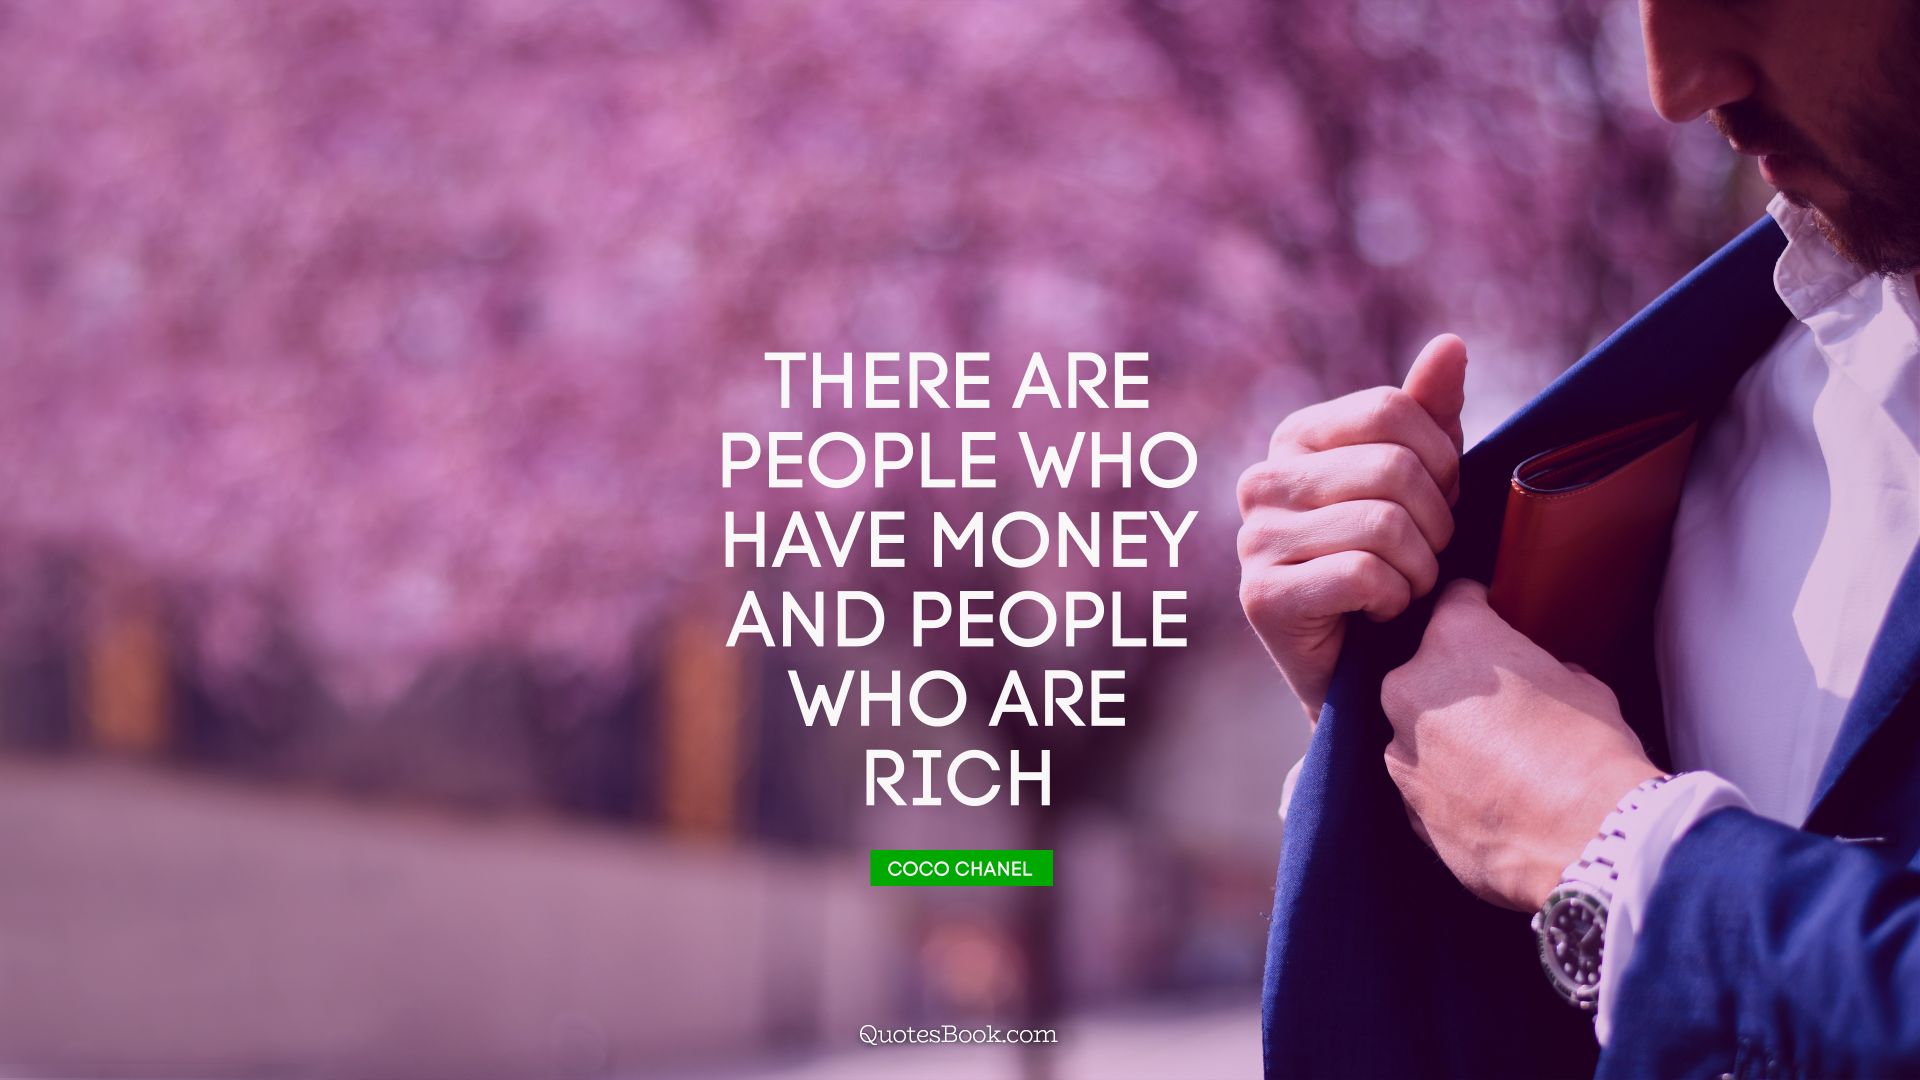 There are people who have money and people who are rich. - Quote by Coco Chanel